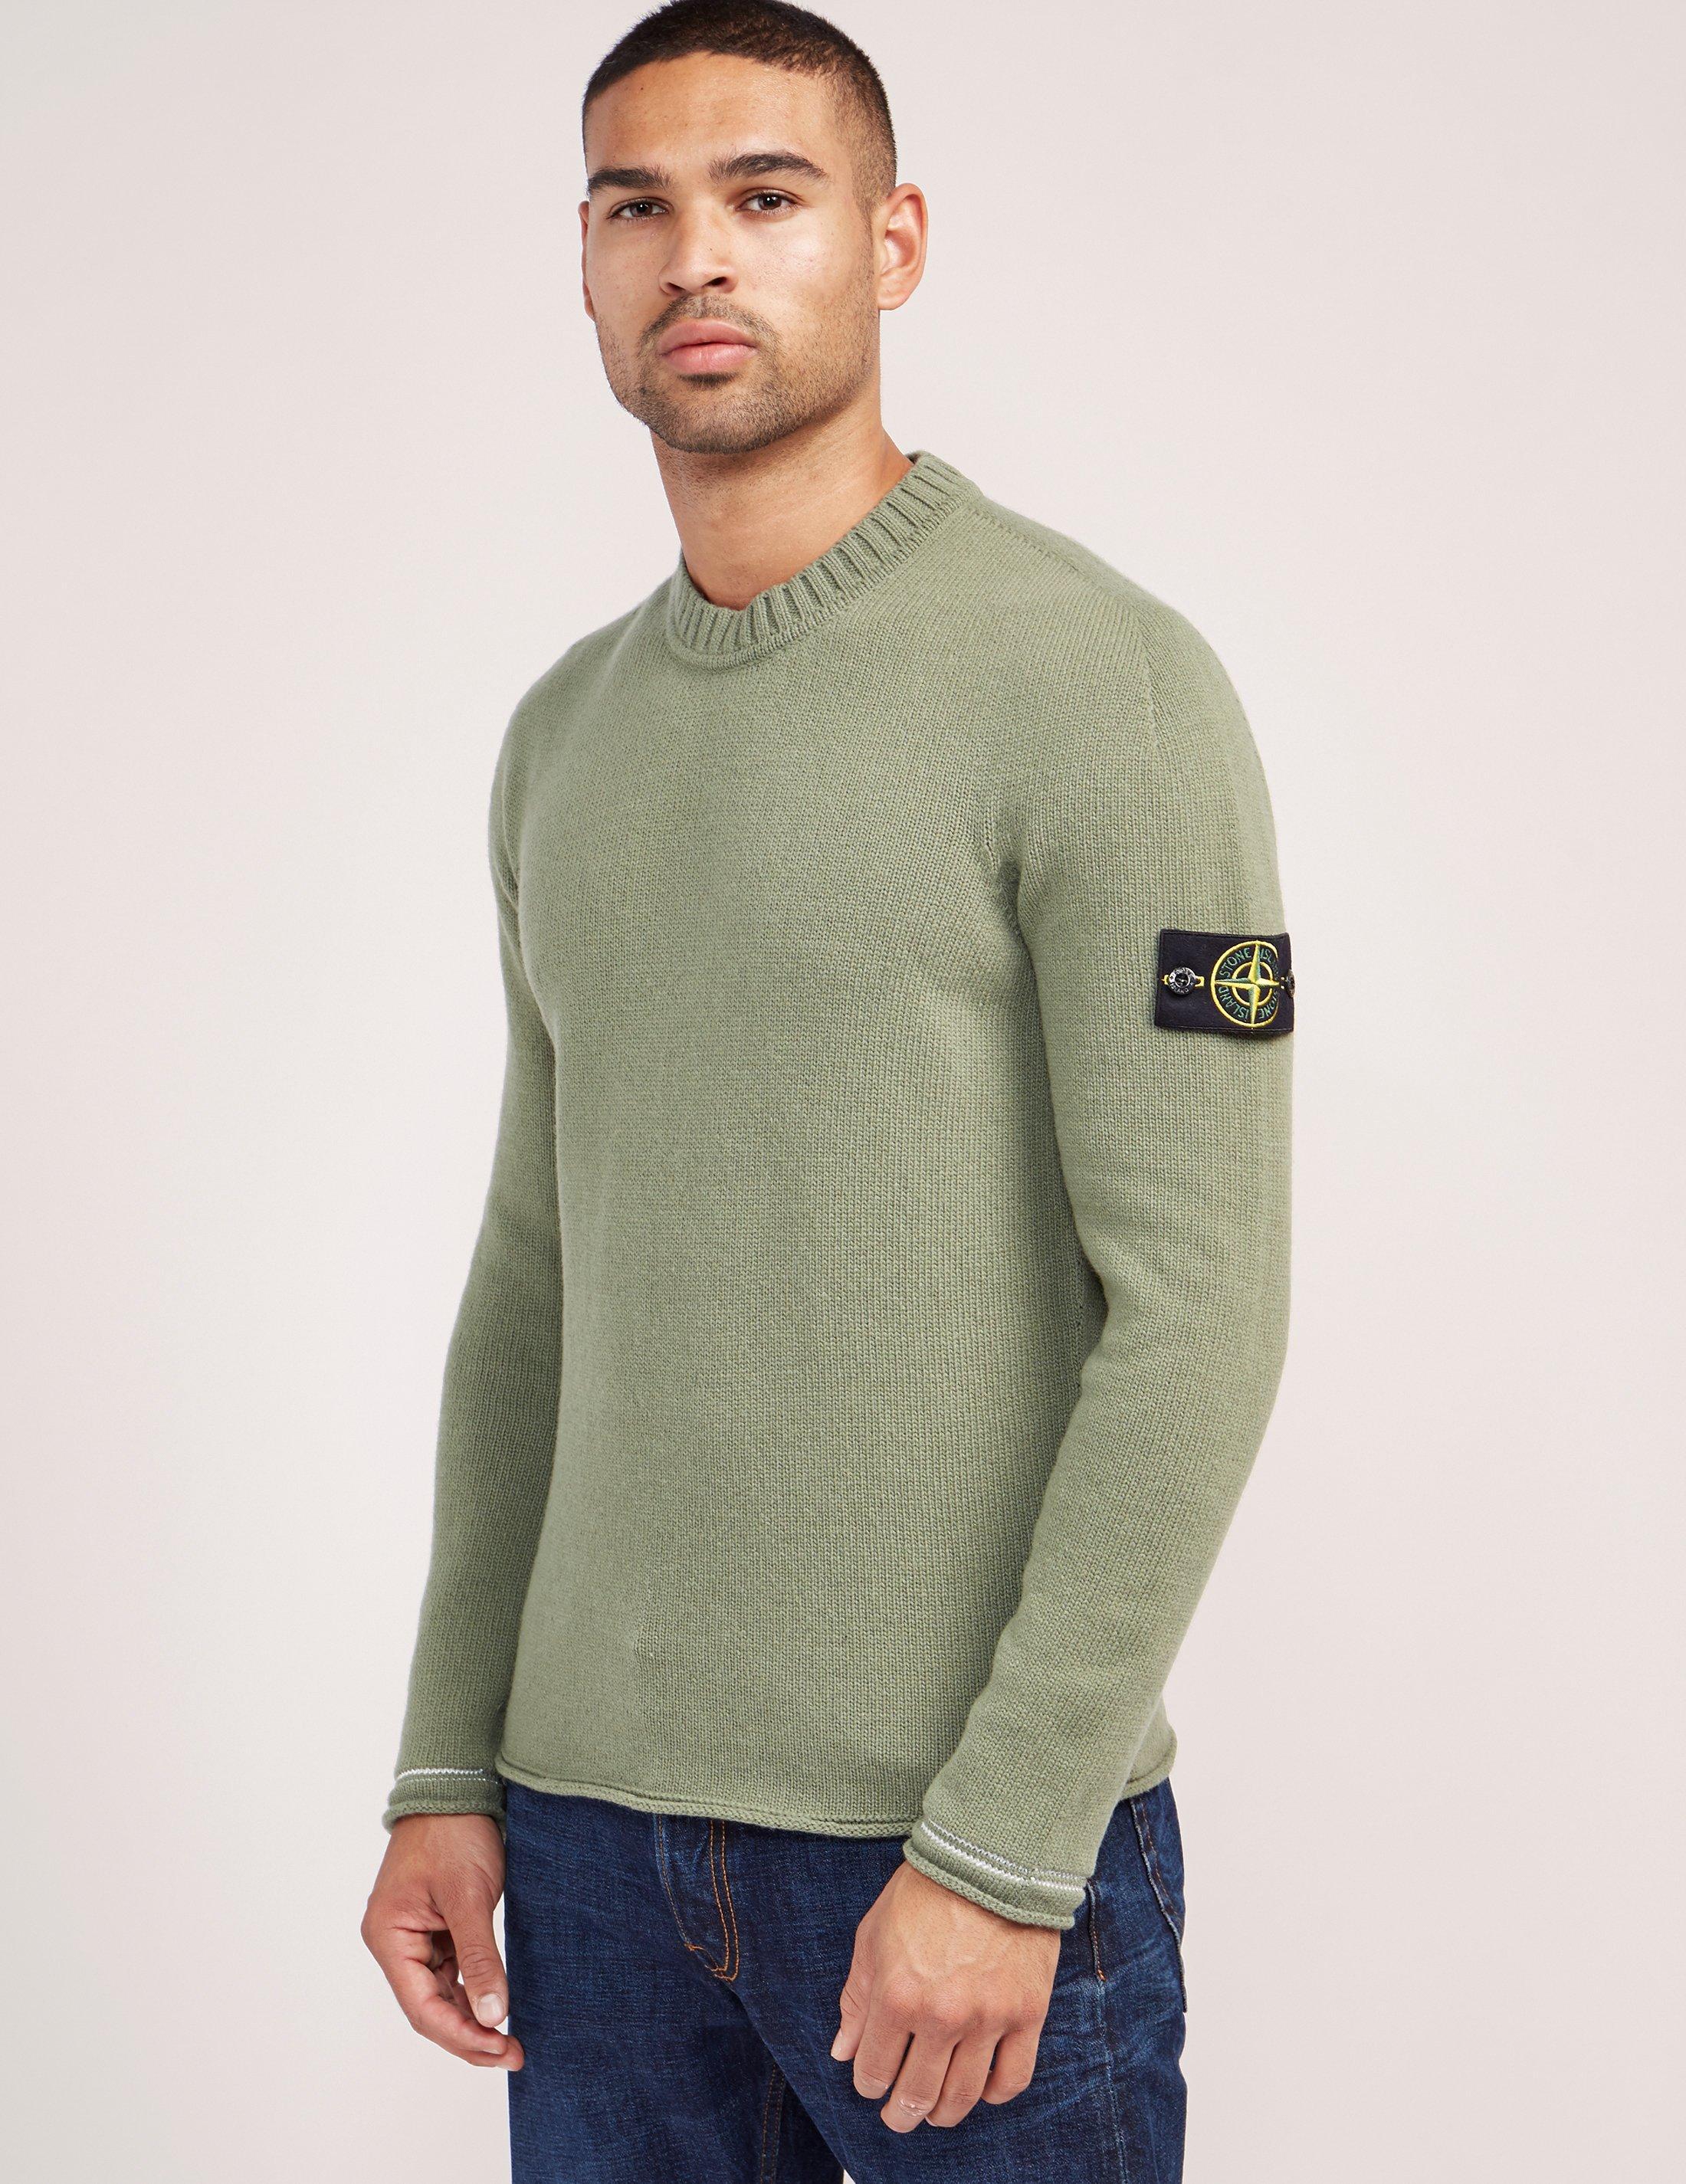 Stone Island Knitted Jumper Hot Sale, GET 59% OFF, ricettecuco.it